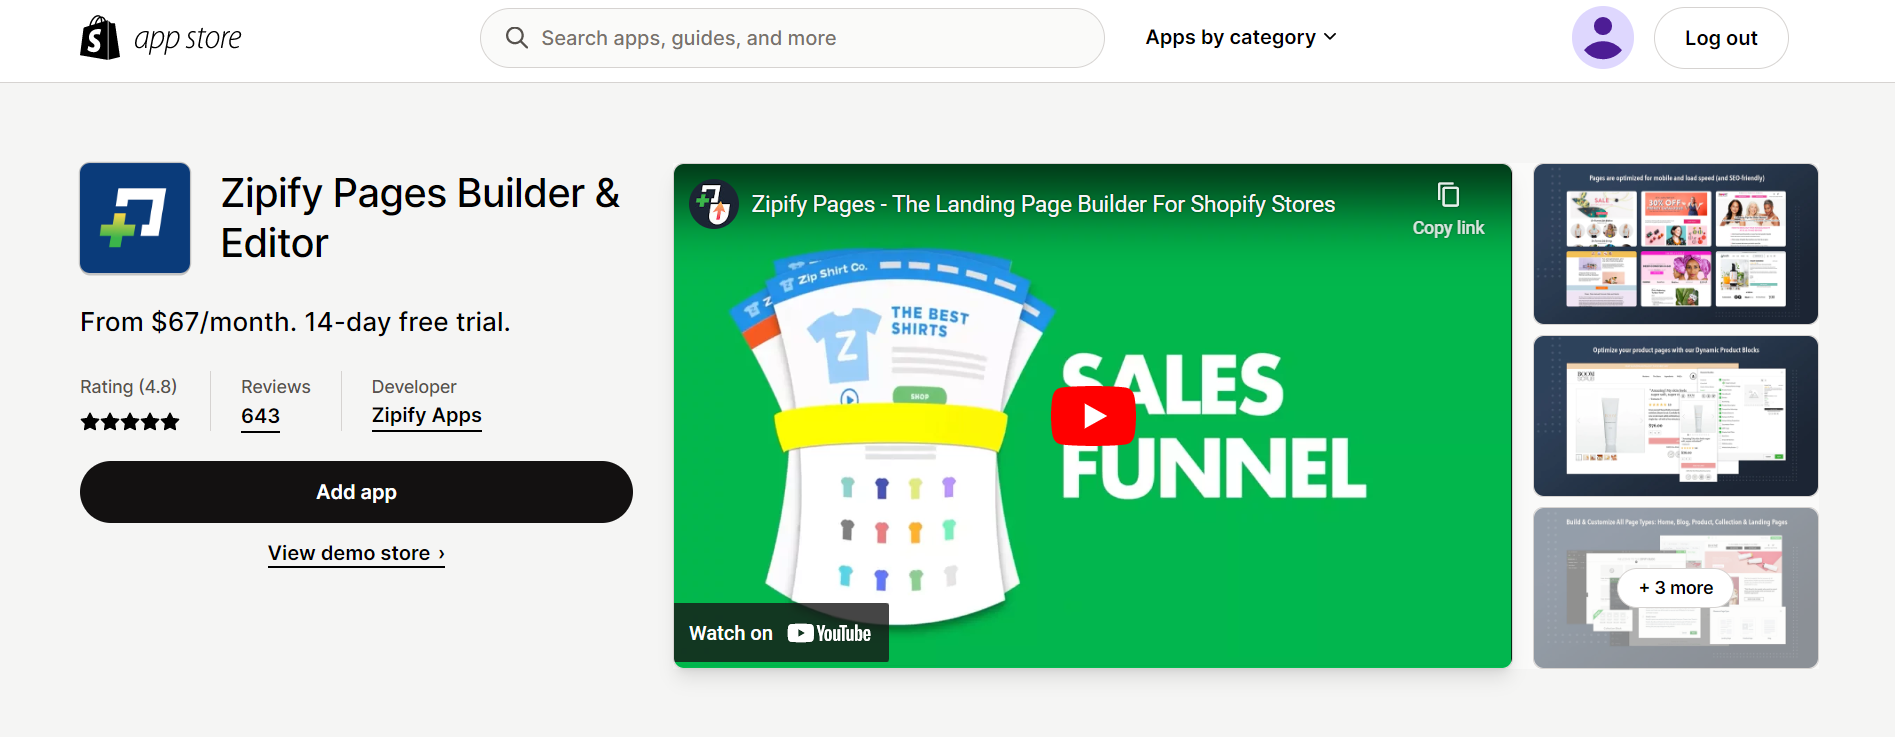 Zipify Pages Builder & Editor Shopify app 